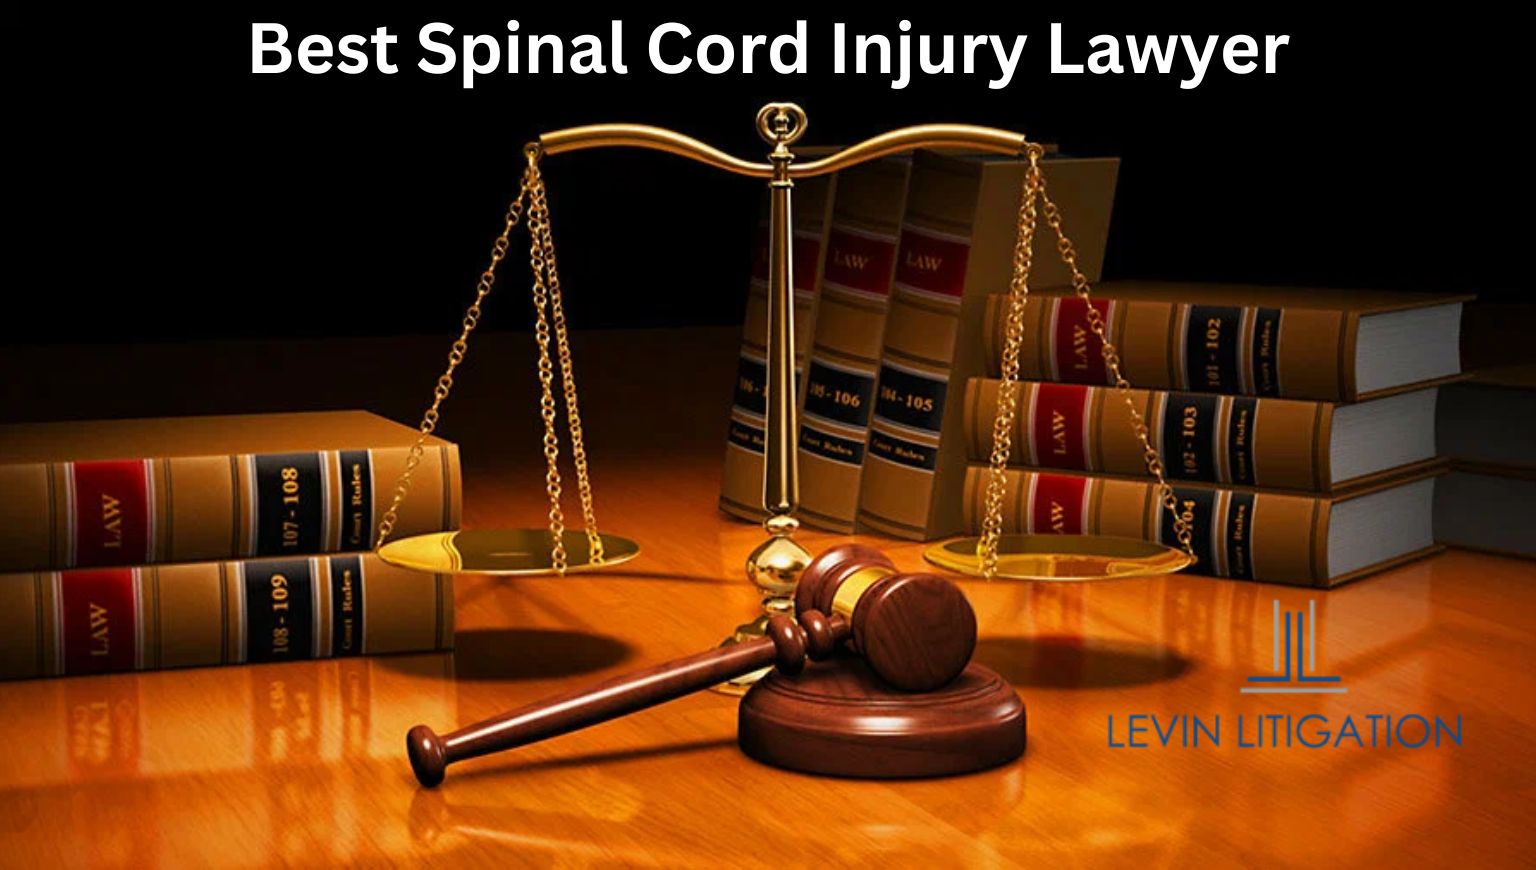 Best Spinal Cord Injury Lawyer